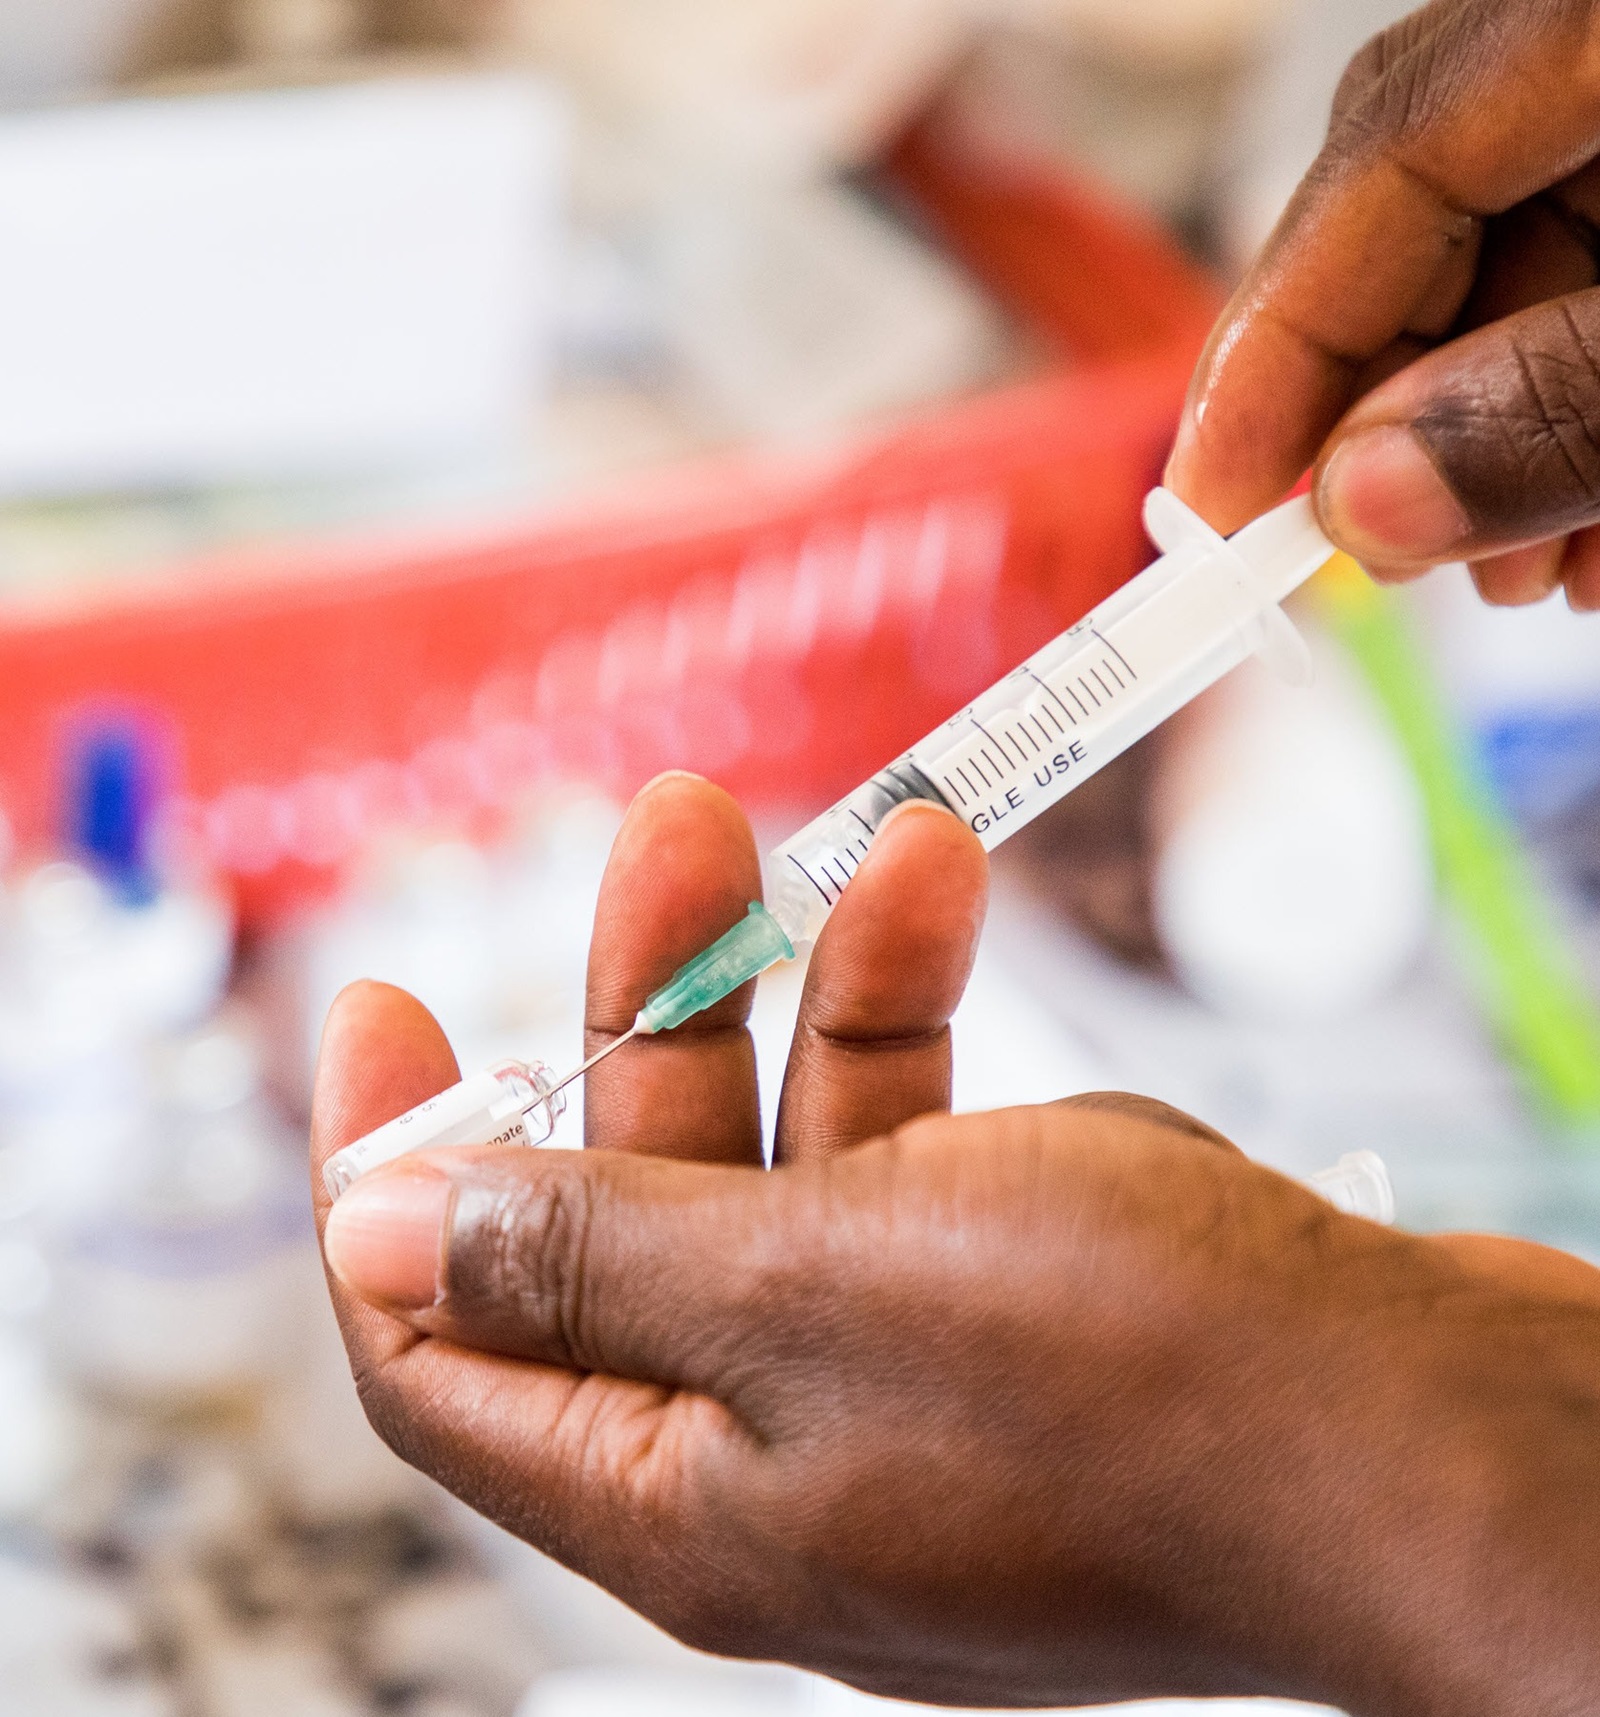 A health care worker prepares a malaria medication at a health center in Zambia.